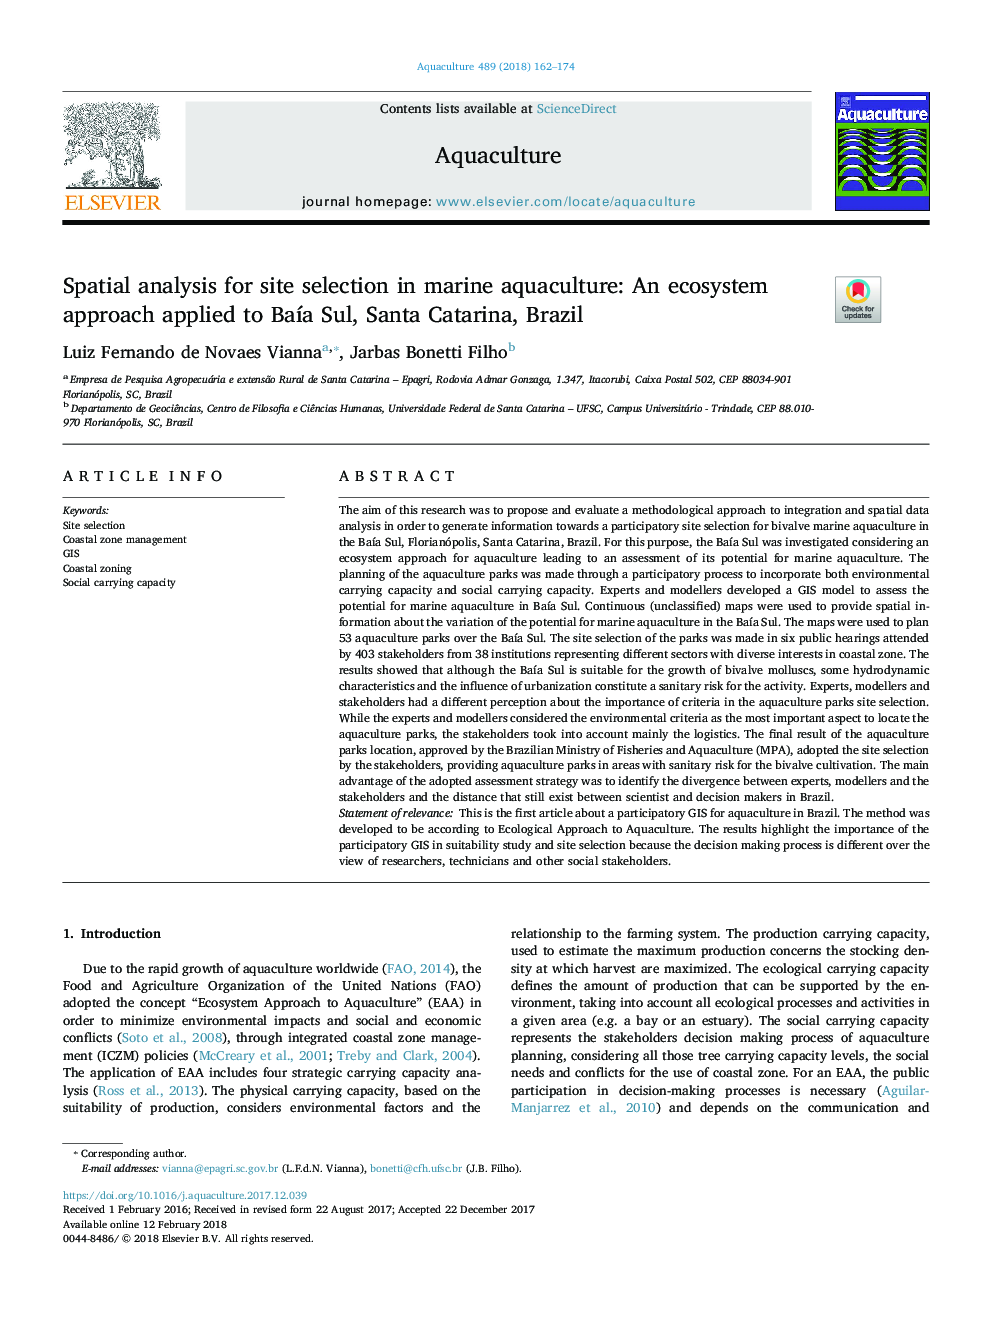 Spatial analysis for site selection in marine aquaculture: An ecosystem approach applied to BaÃ­a Sul, Santa Catarina, Brazil